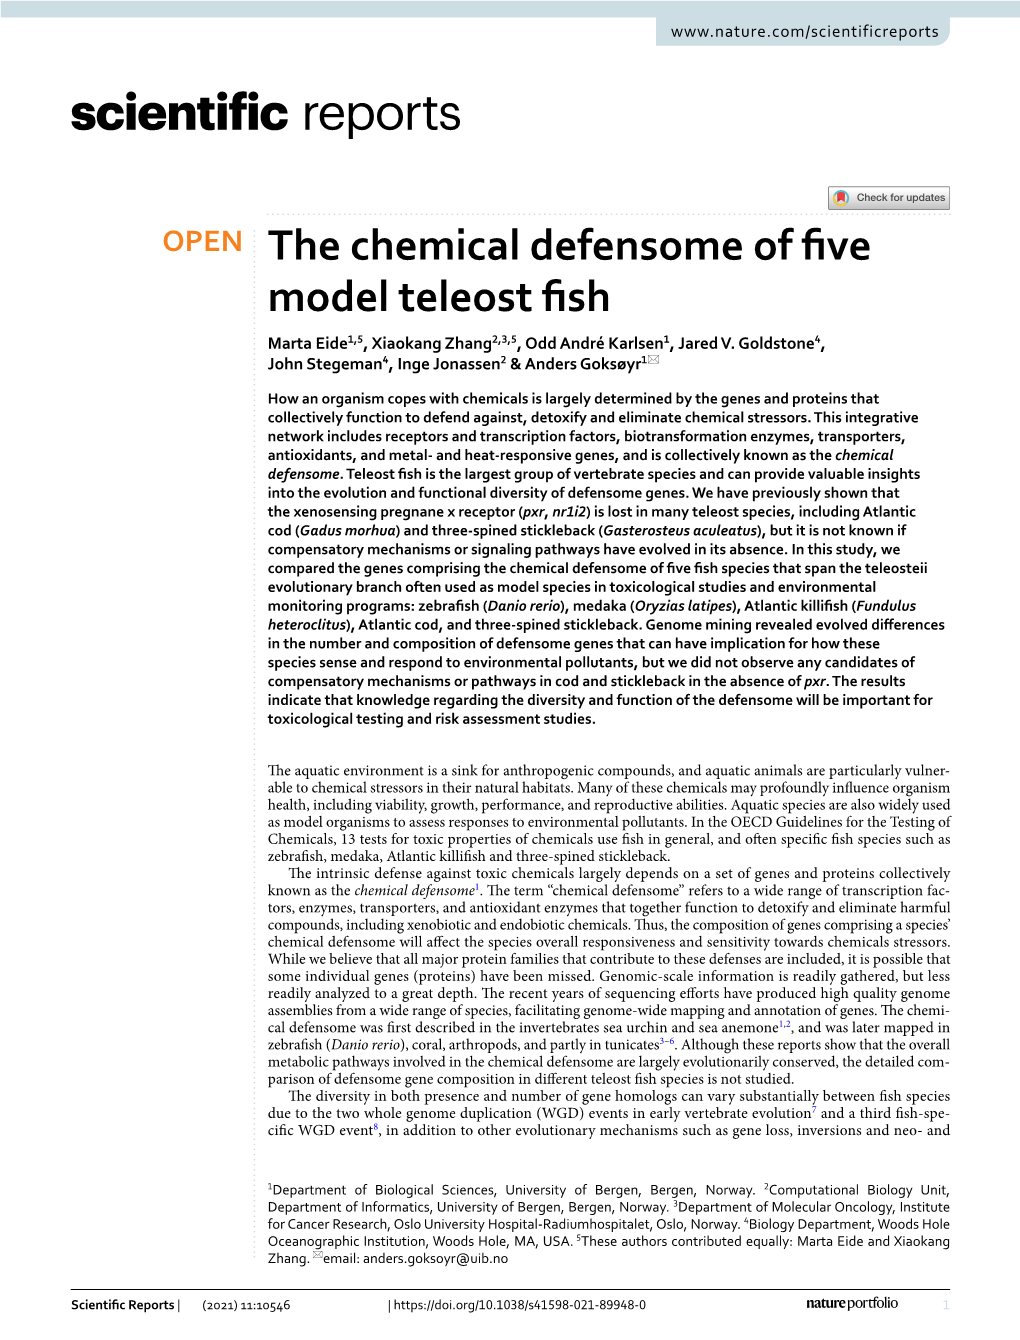 The Chemical Defensome of Five Model Teleost Fish